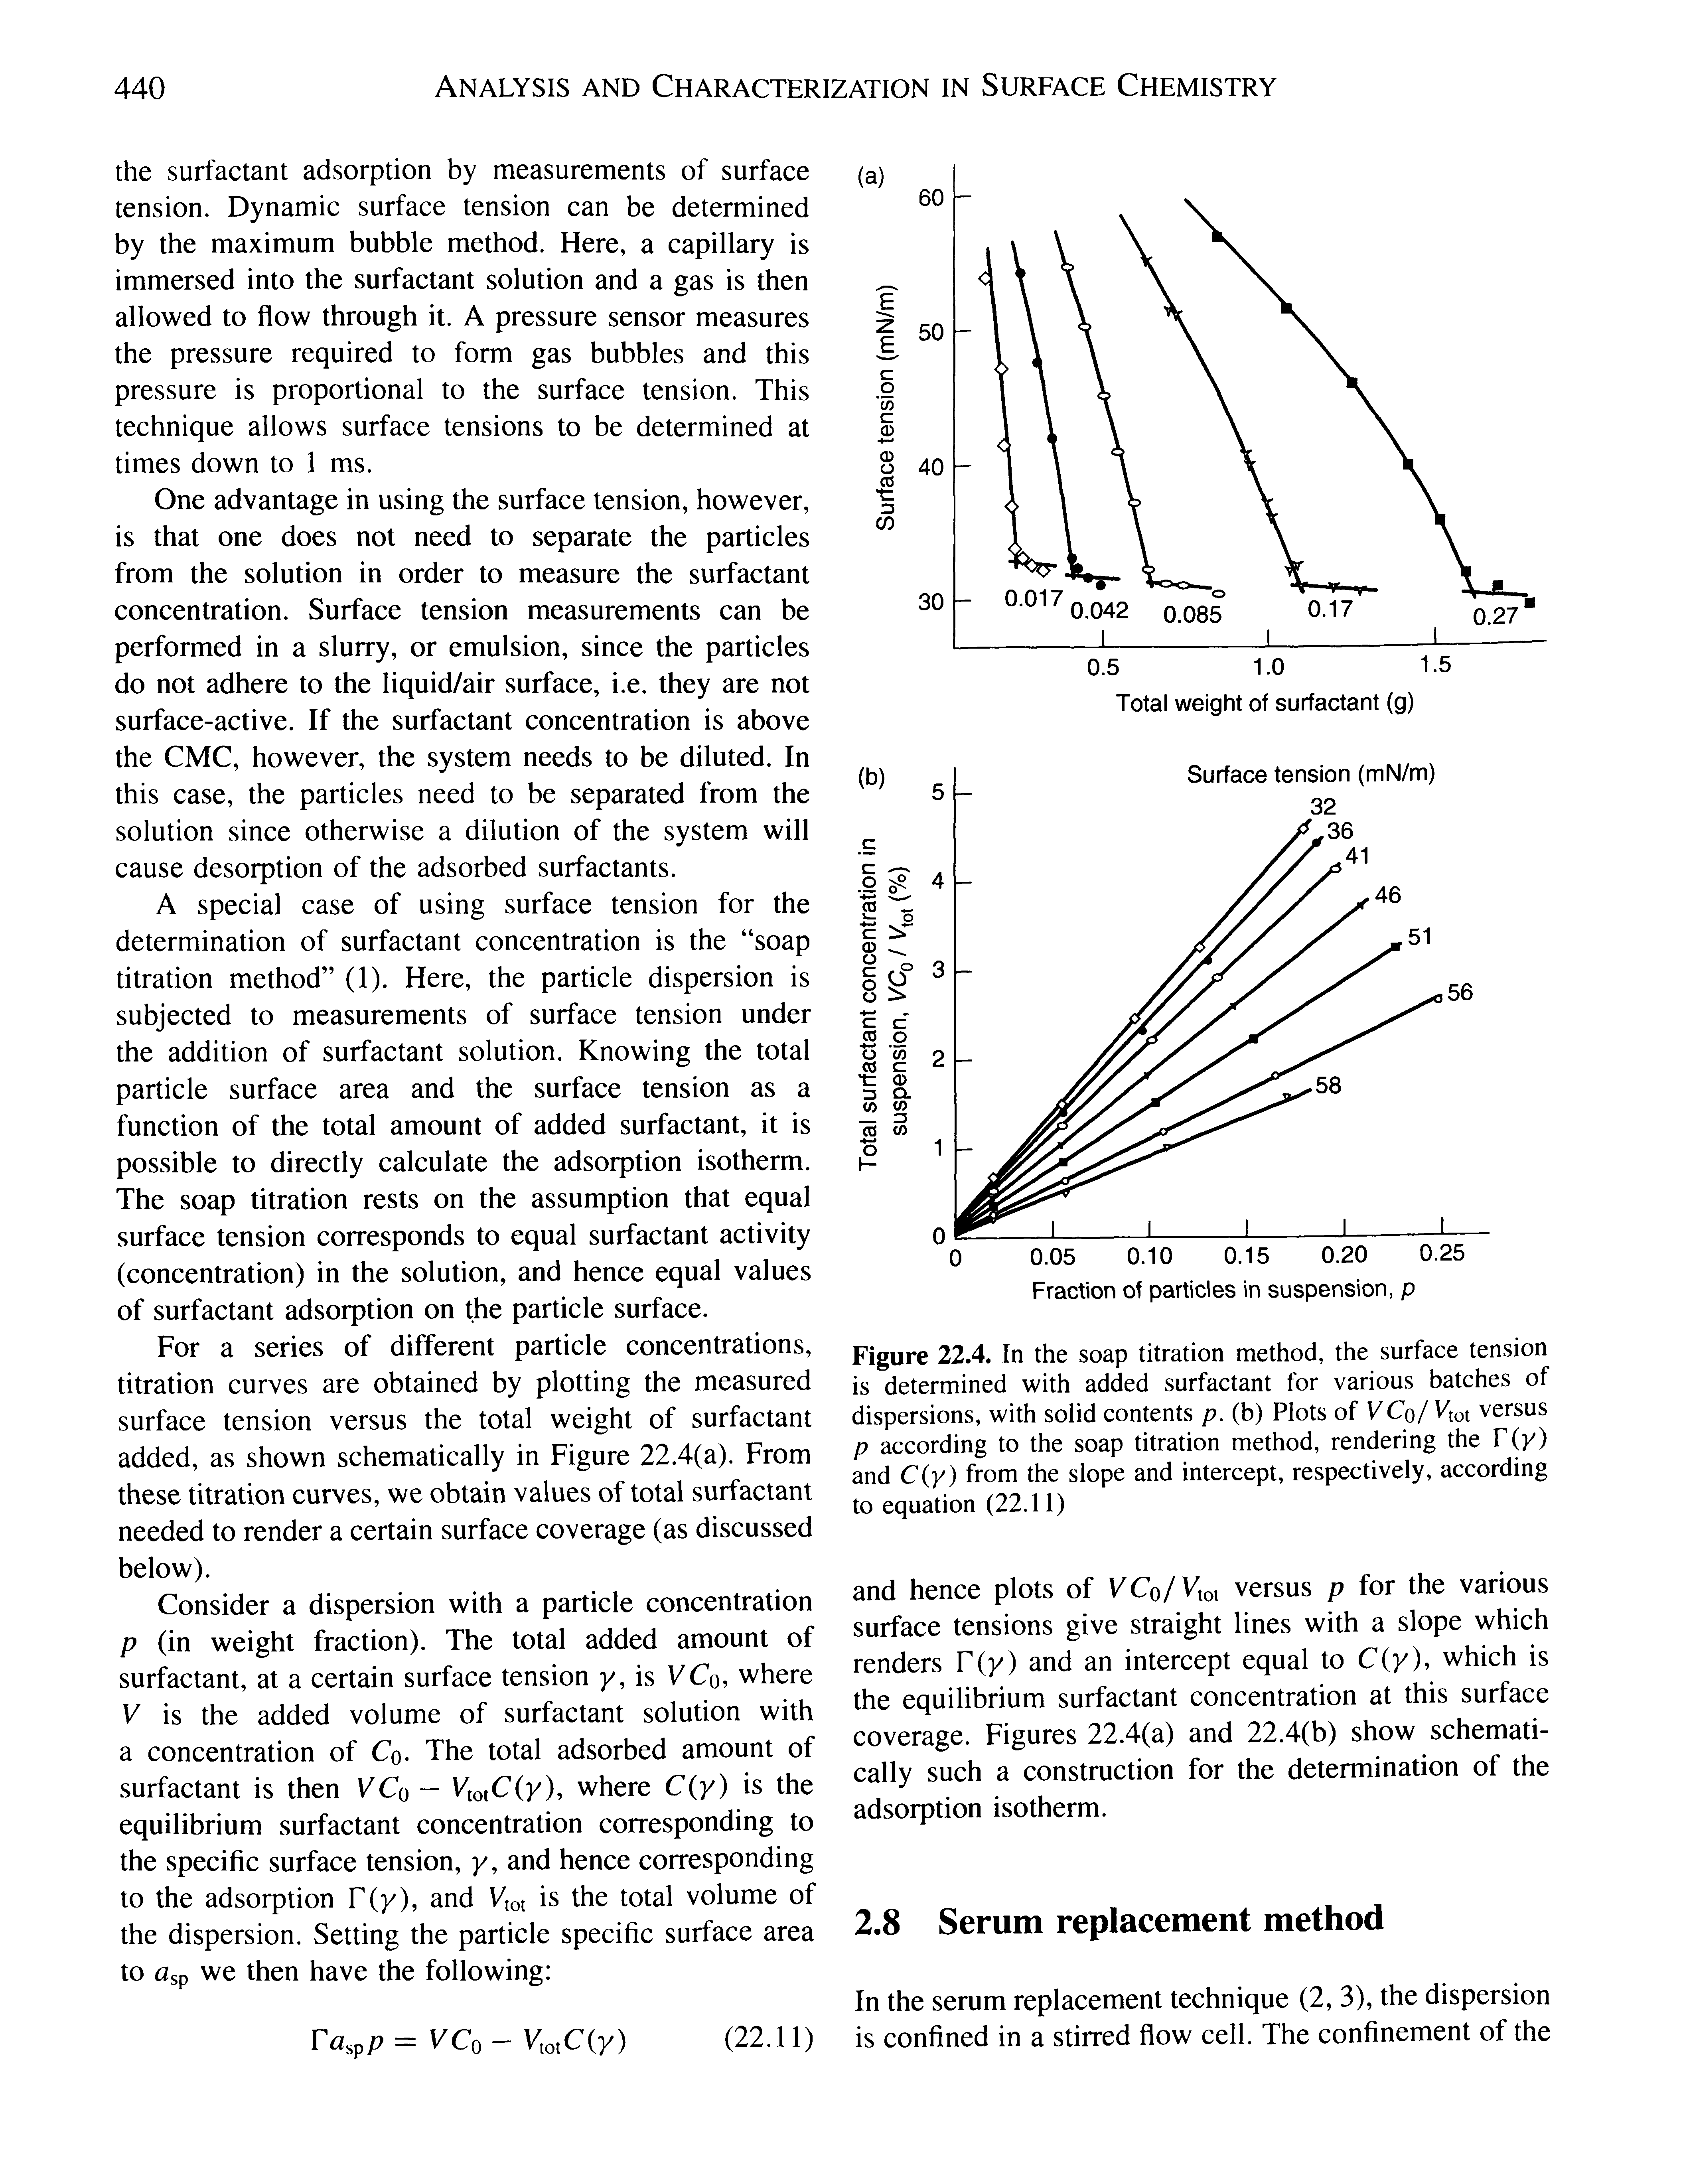 Figure 22.4. In the soap titration method, the surface tension is determined with added surfactant for various batches of dispersions, with solid contents p. (b) Plots of VCo/ Kot versus p according to the soap titration method, rendering the F(y) and C(y) from the slope and intercept, respectively, according to equation (22.11)...